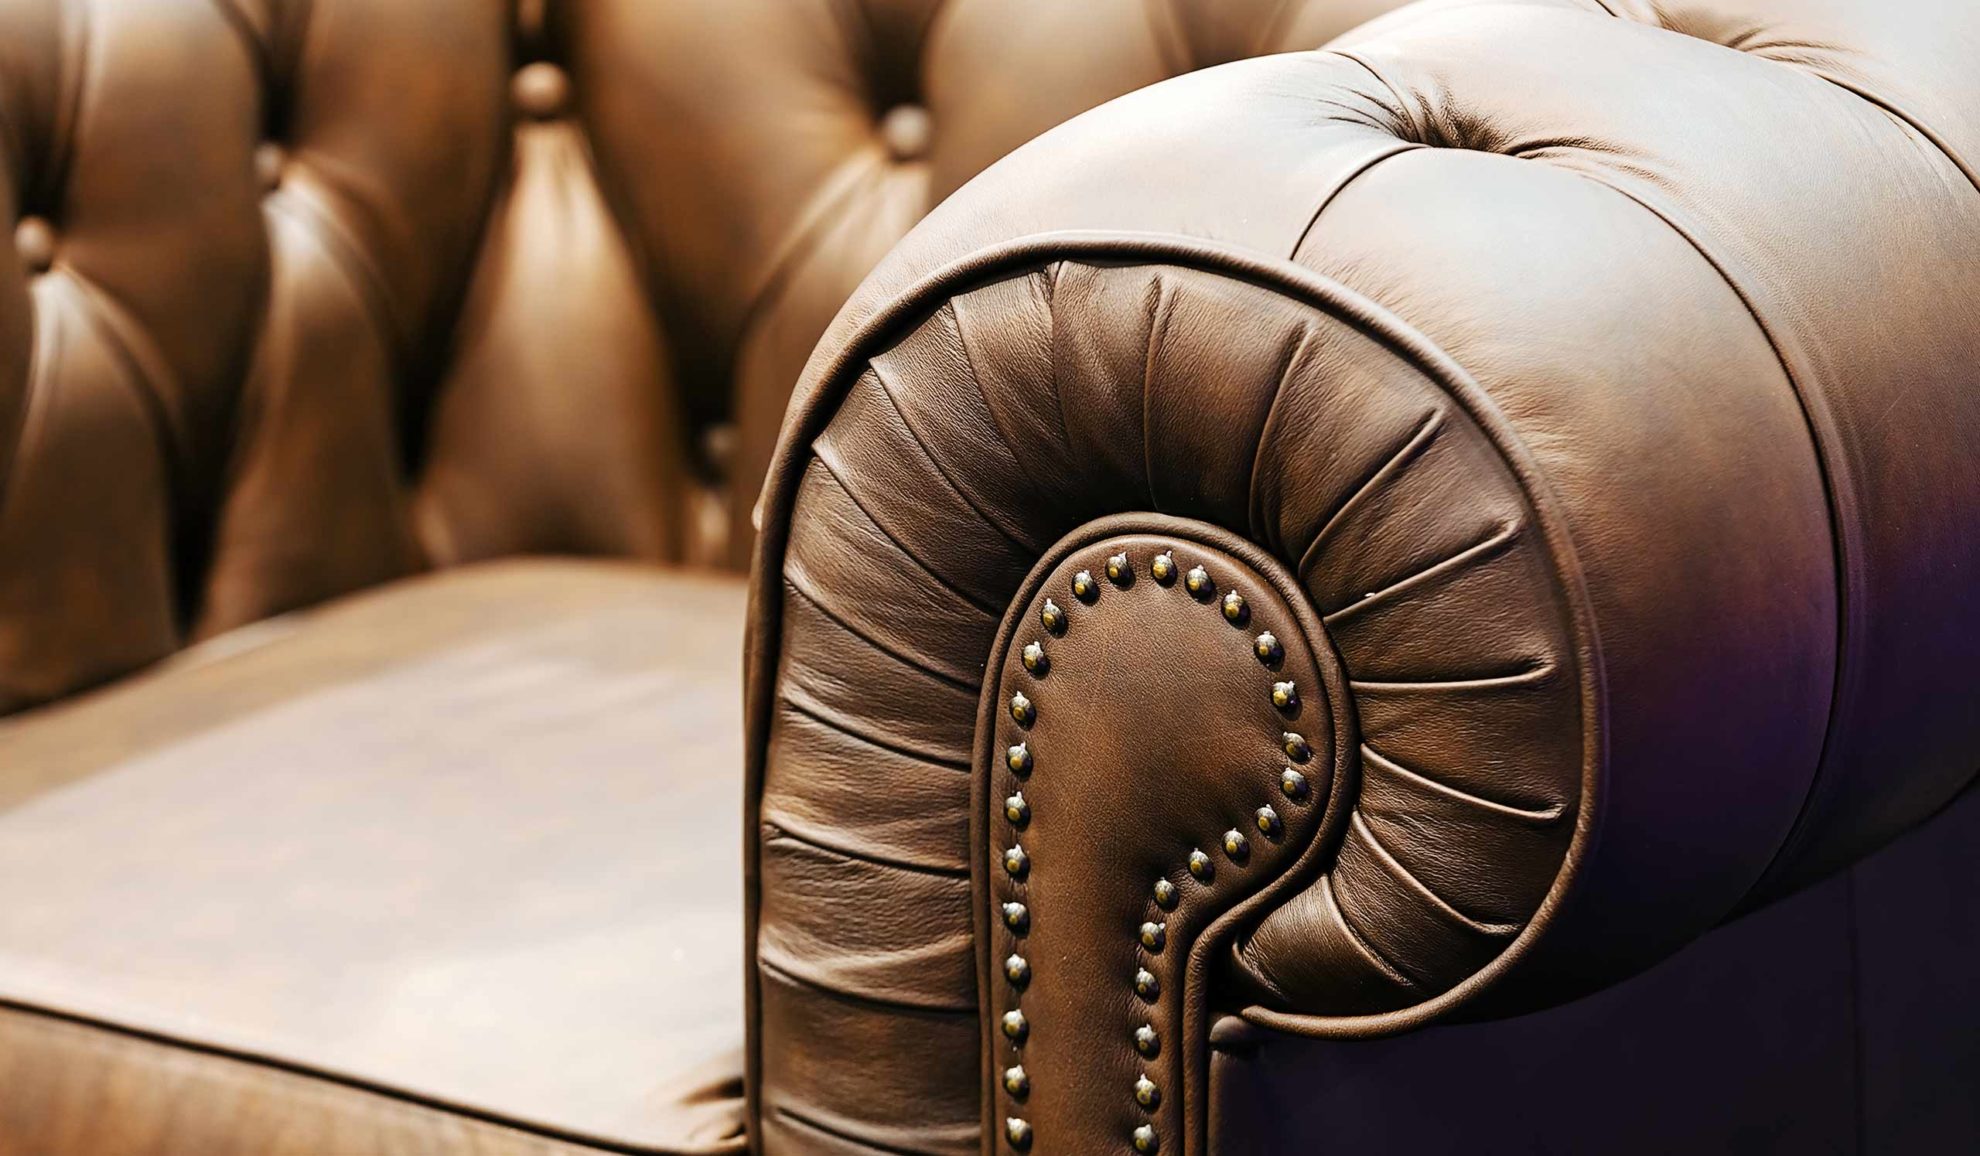 upclose-of-brown-leather-love-seat-shreveport-la